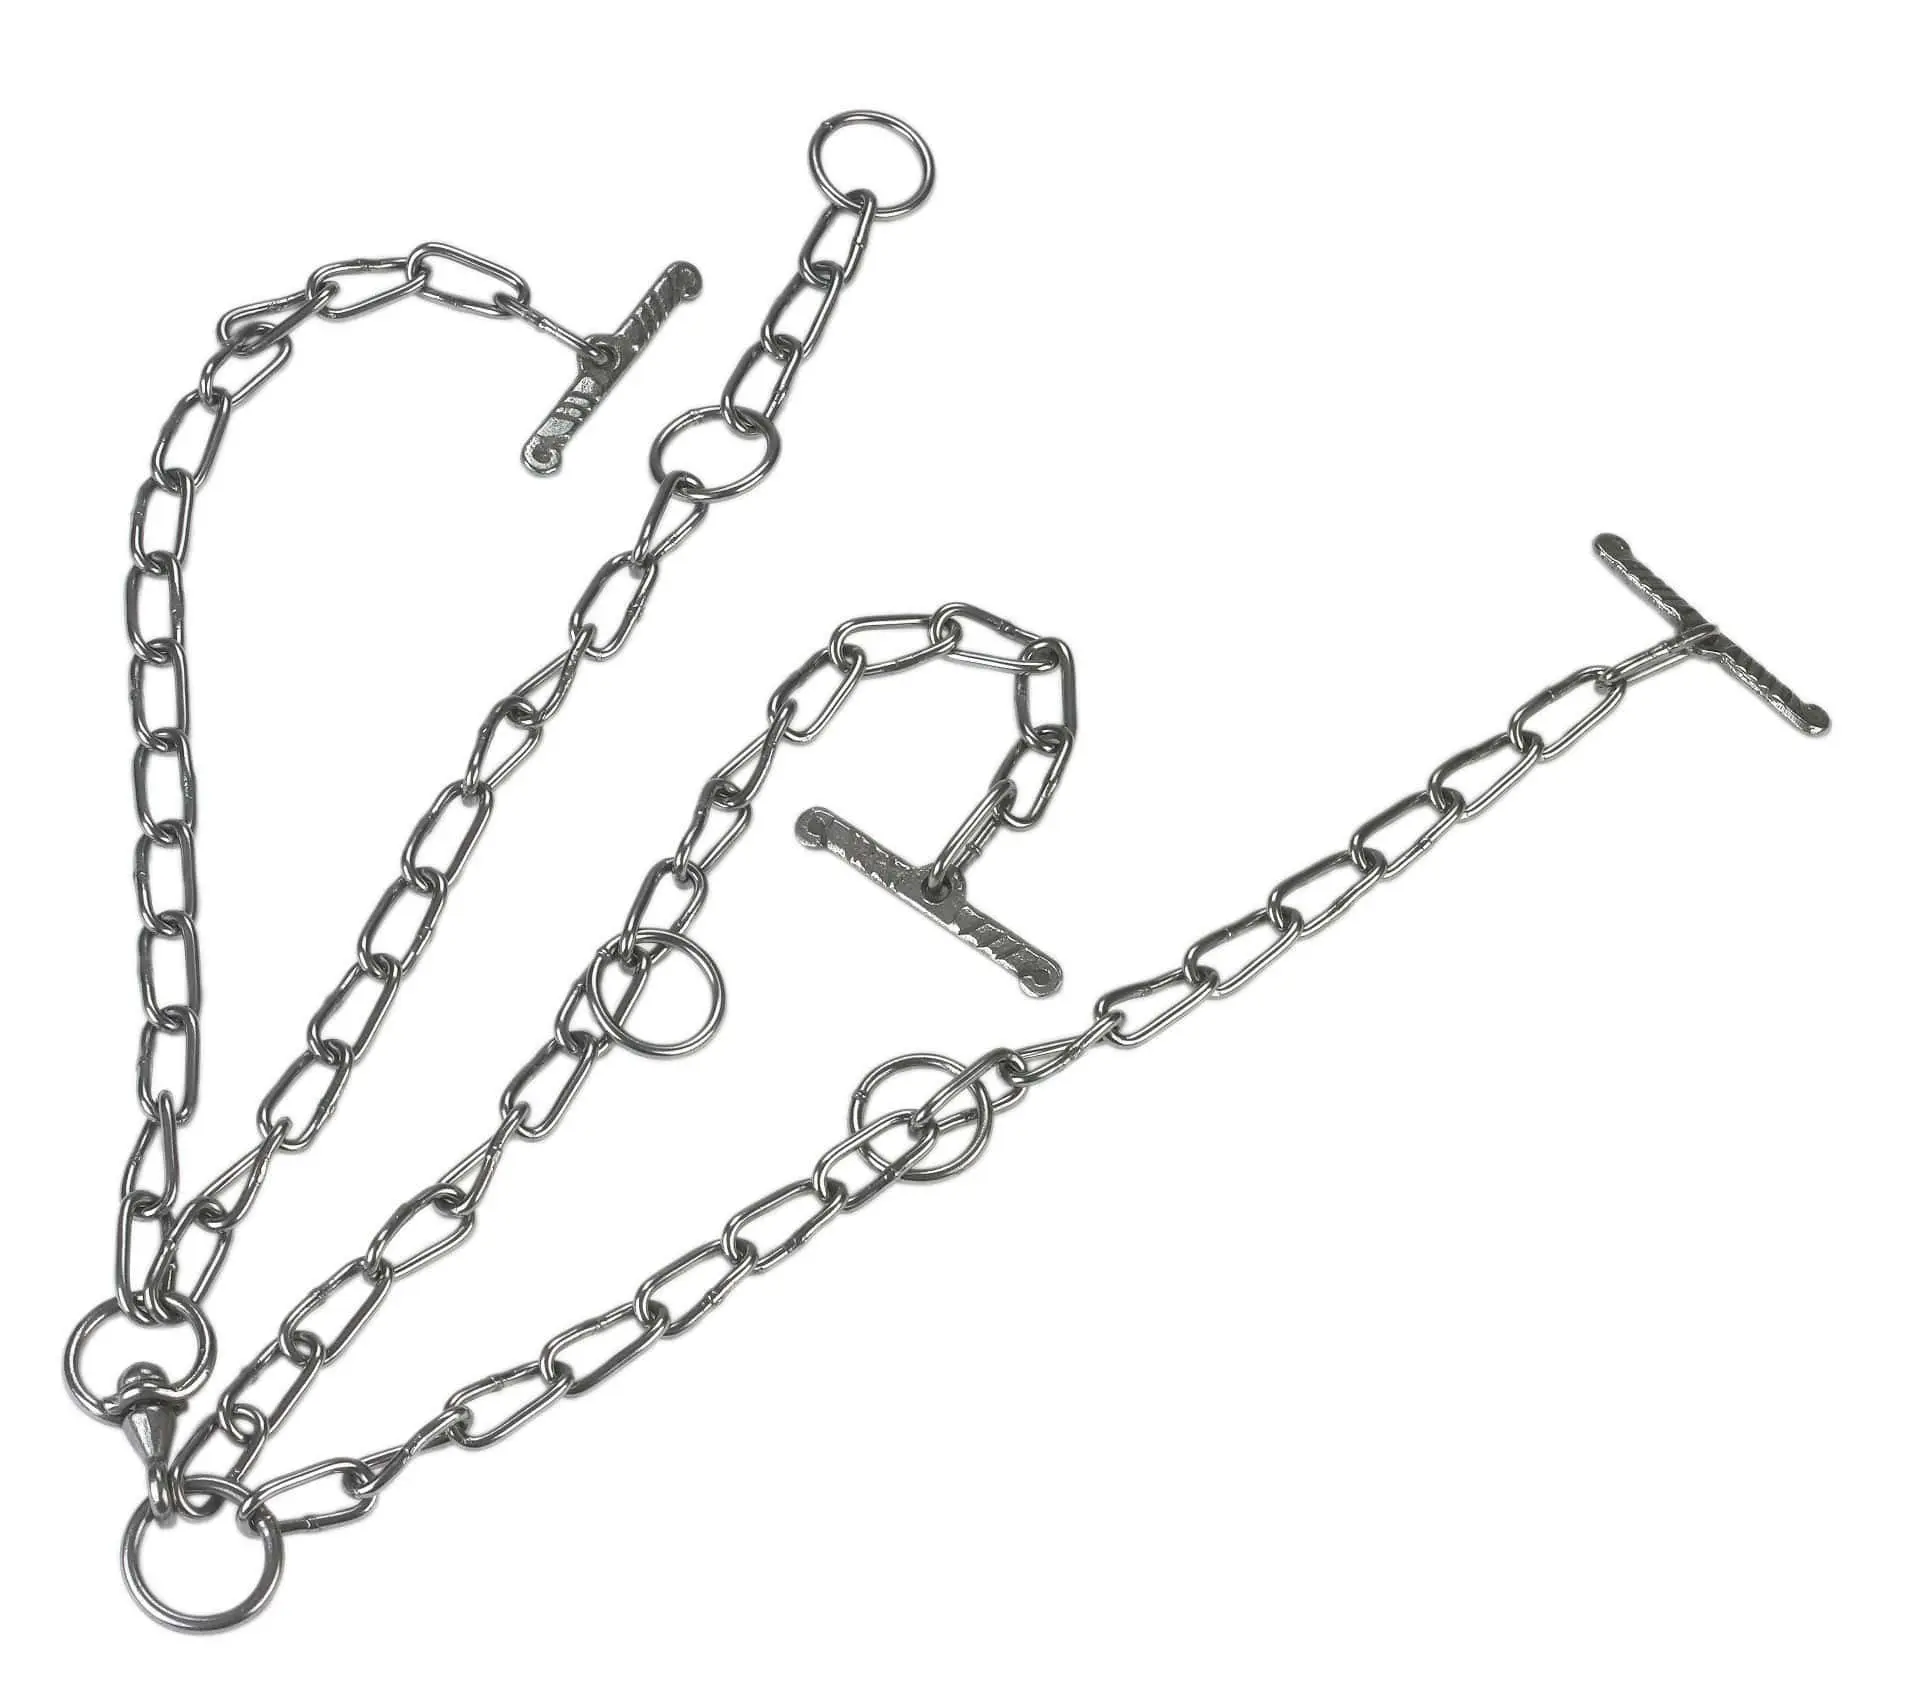 Cow chain double lengthened galvanized